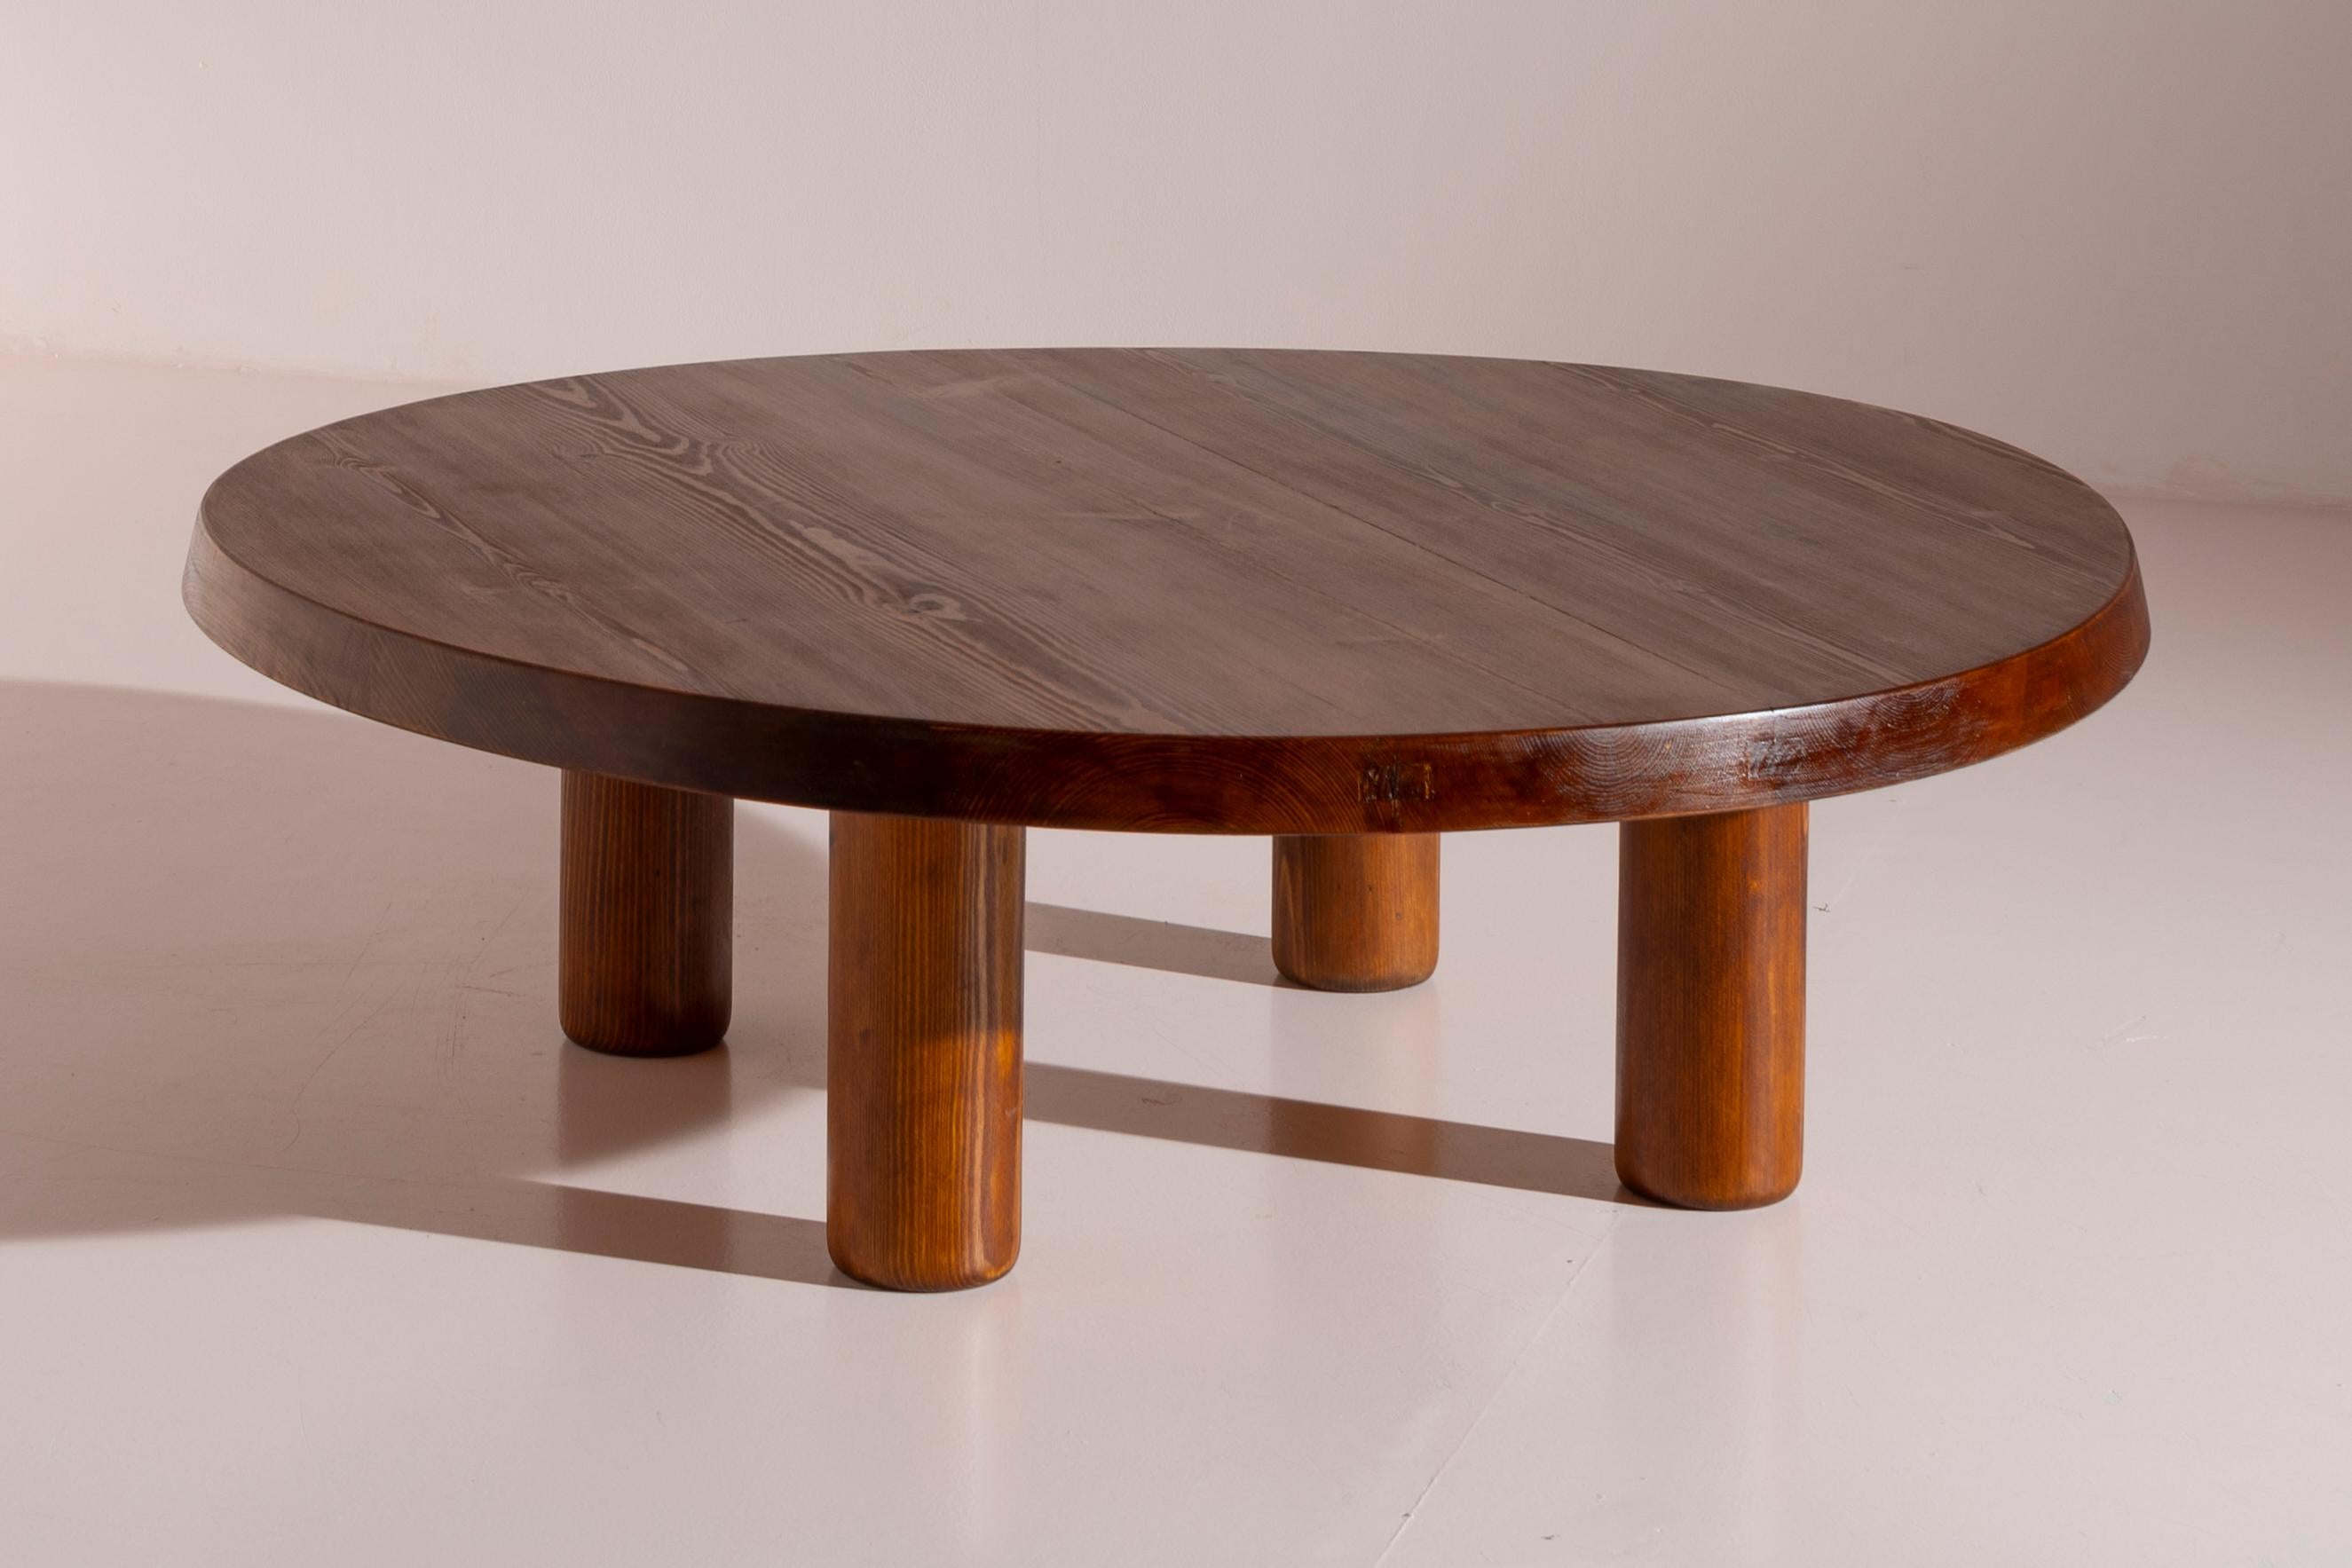 Low pinewood coffee table, French craftsmanship from the late 1960s, designed by Charlotte Perriand for the Les Arcs 1600 ski station residence.

This table features geometric lines, a perfect circle supported by four cylinders. It encapsulates the